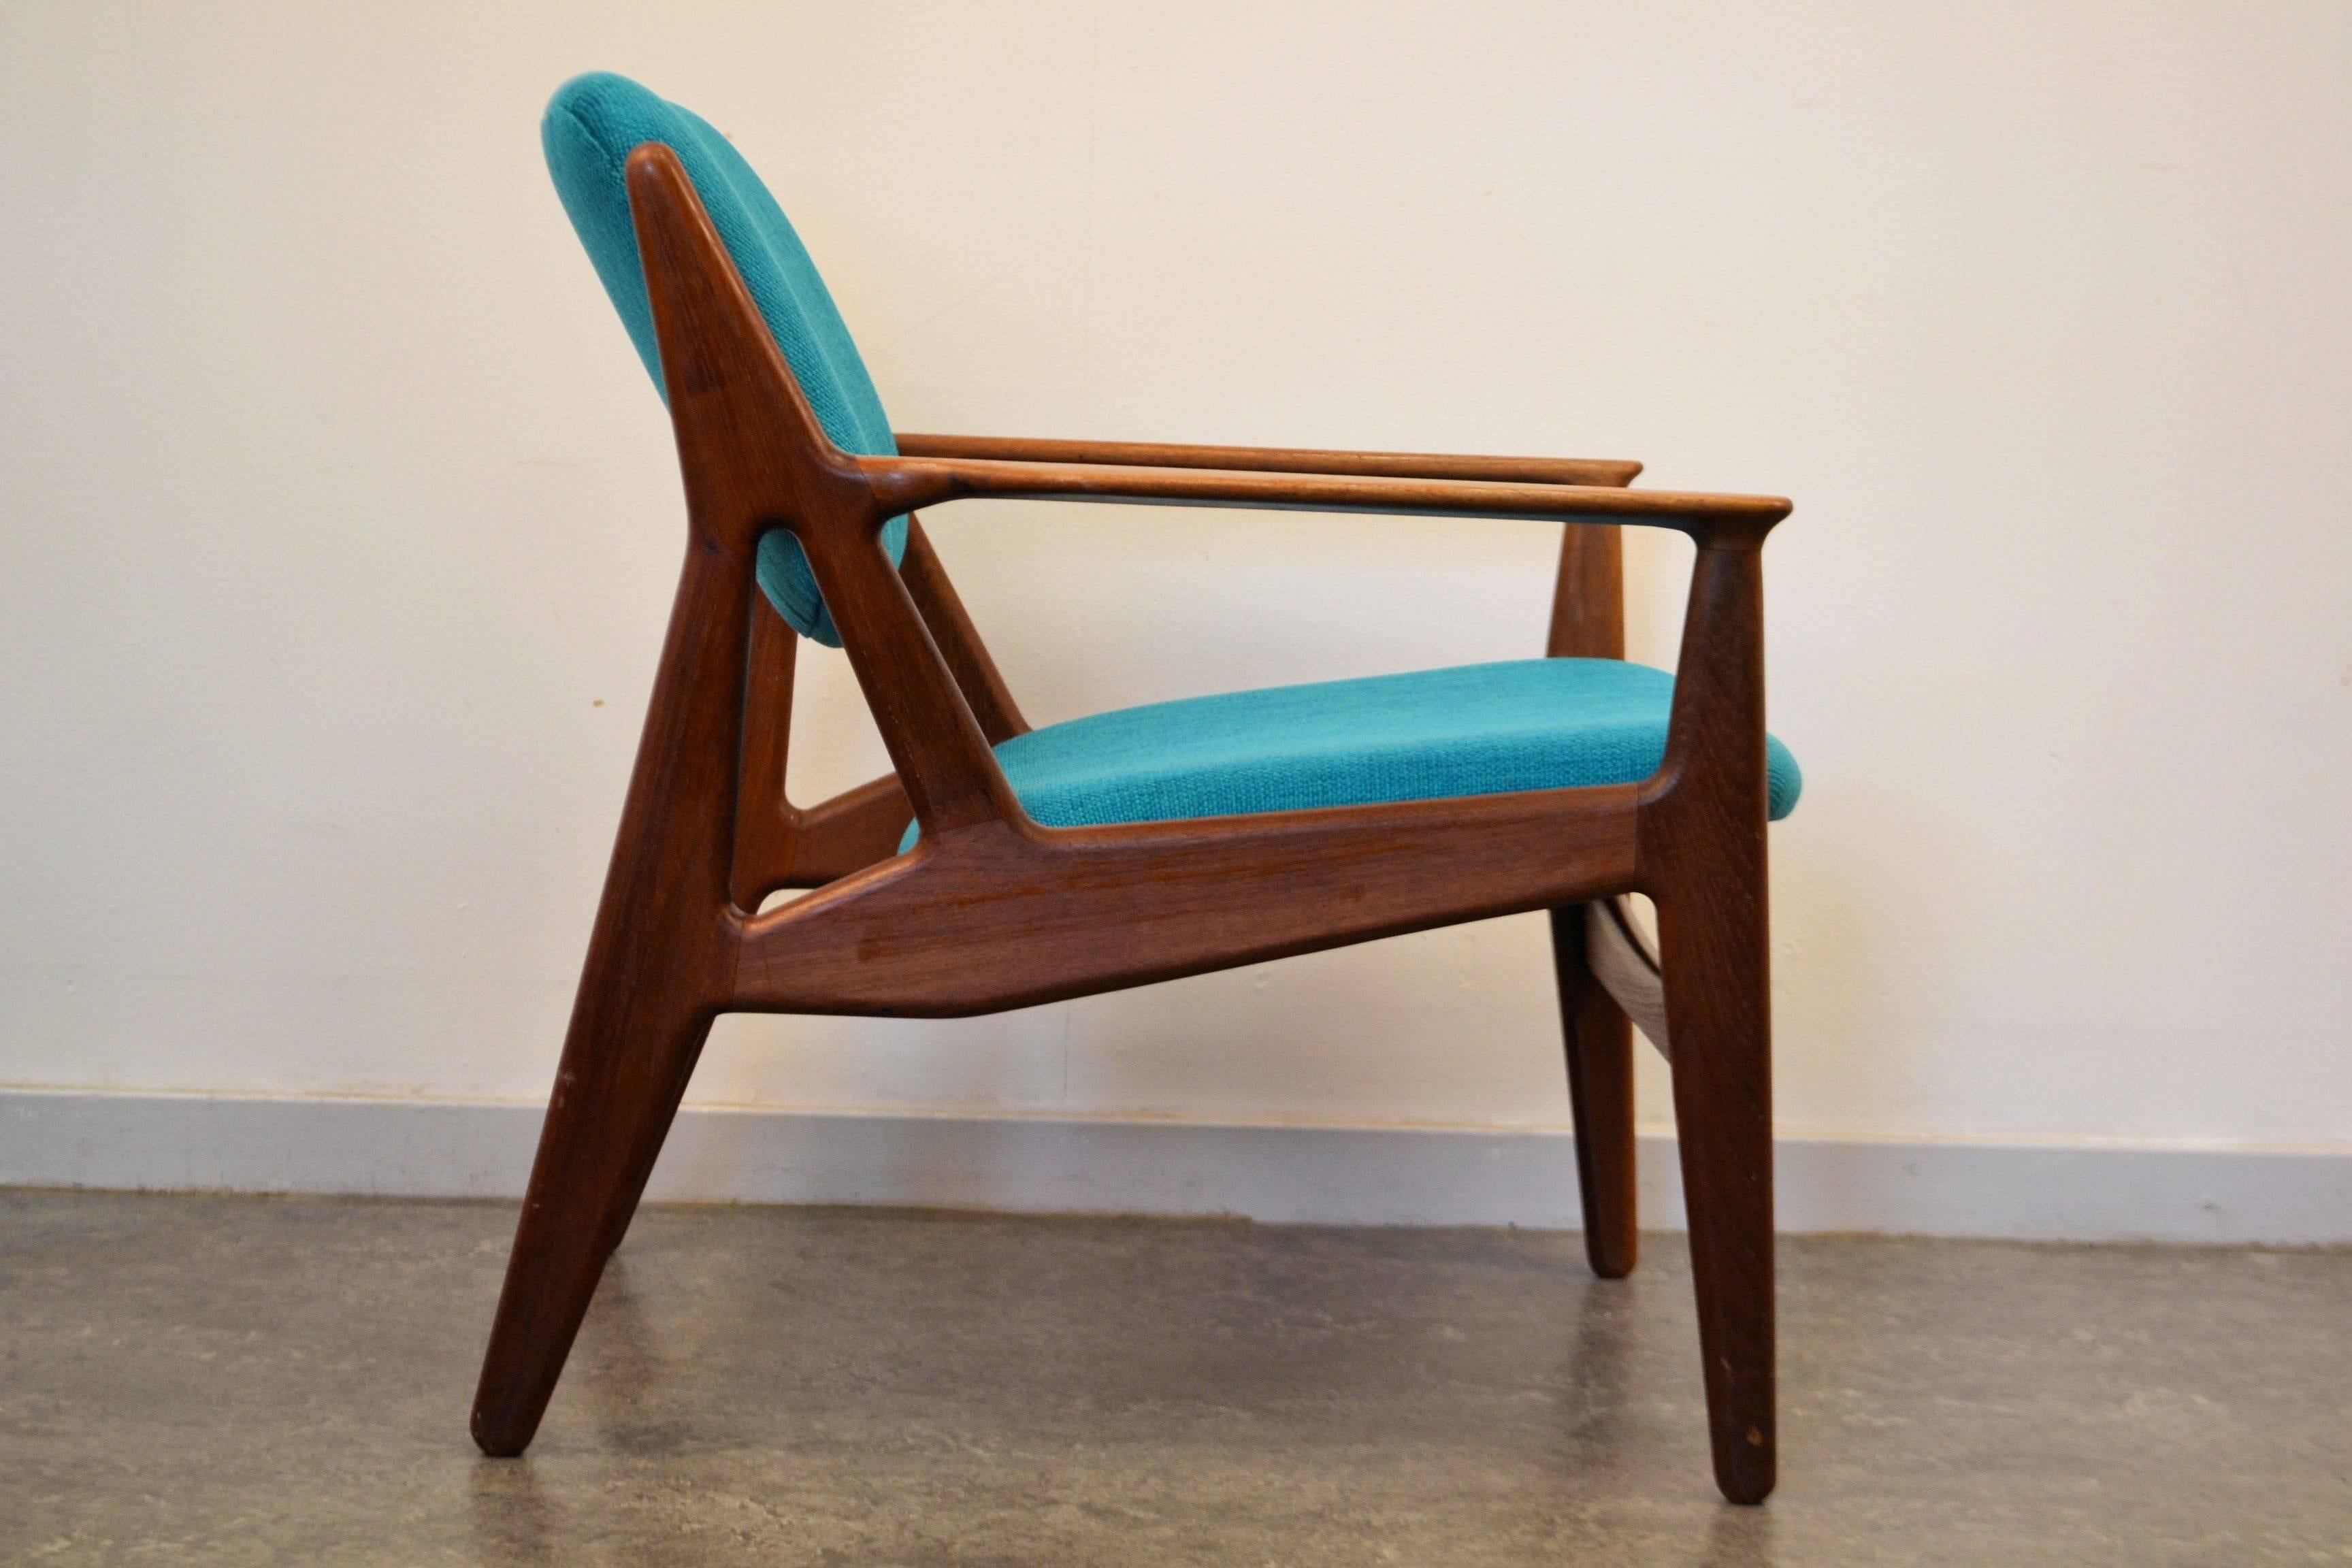 Danish design teak lounge chair designed by Arne Vodder for Vamo Sønderborg in Denmark during the 1950s.
Arne Vodder created a few pieces for Vamo and they are all quite unique straying slightly from the rest of his work. This chair low slung chair